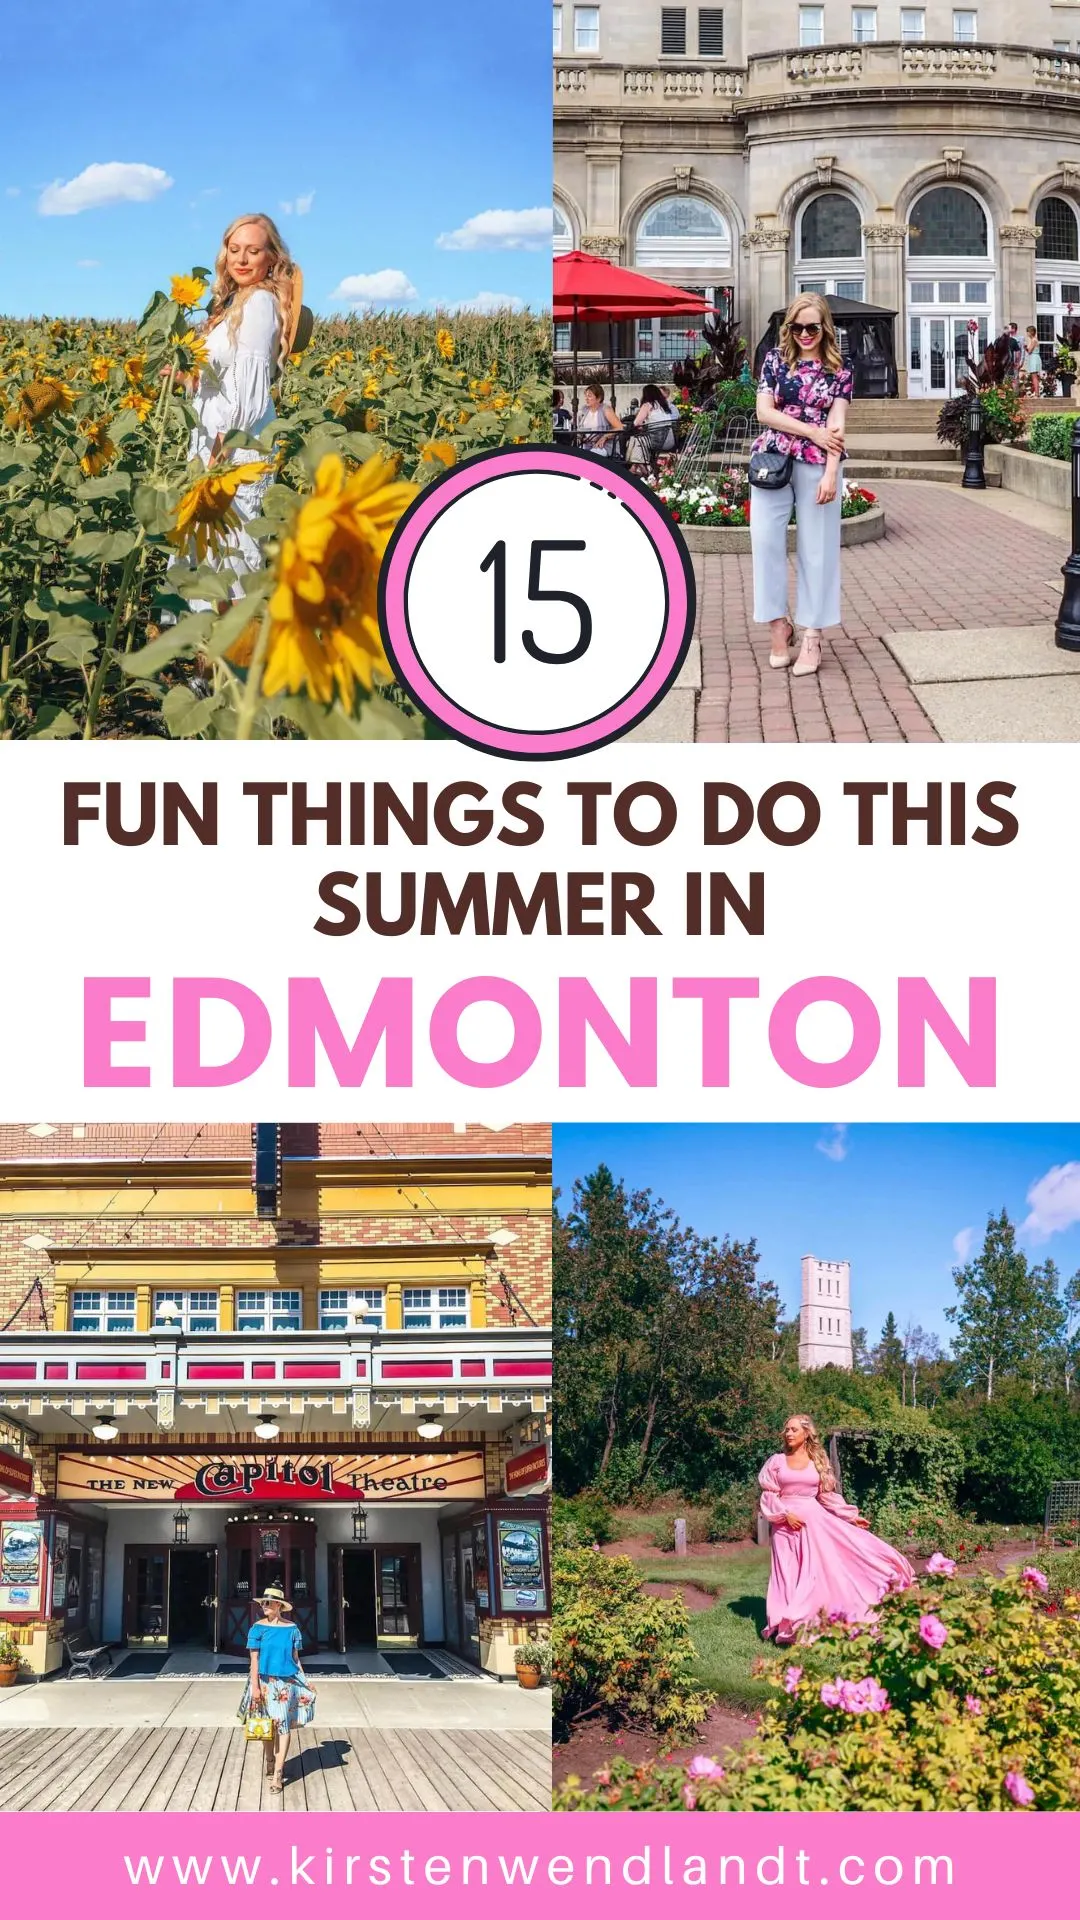 Looking for some fun things to do in Edmonton this summer? This guide includes all sorts of family friendly activities for you to try out! Whether you're looking for free things to do in Edmonton or you're ok with spending a little on activities, this guide has both free and paid ideas for you to check out this year.